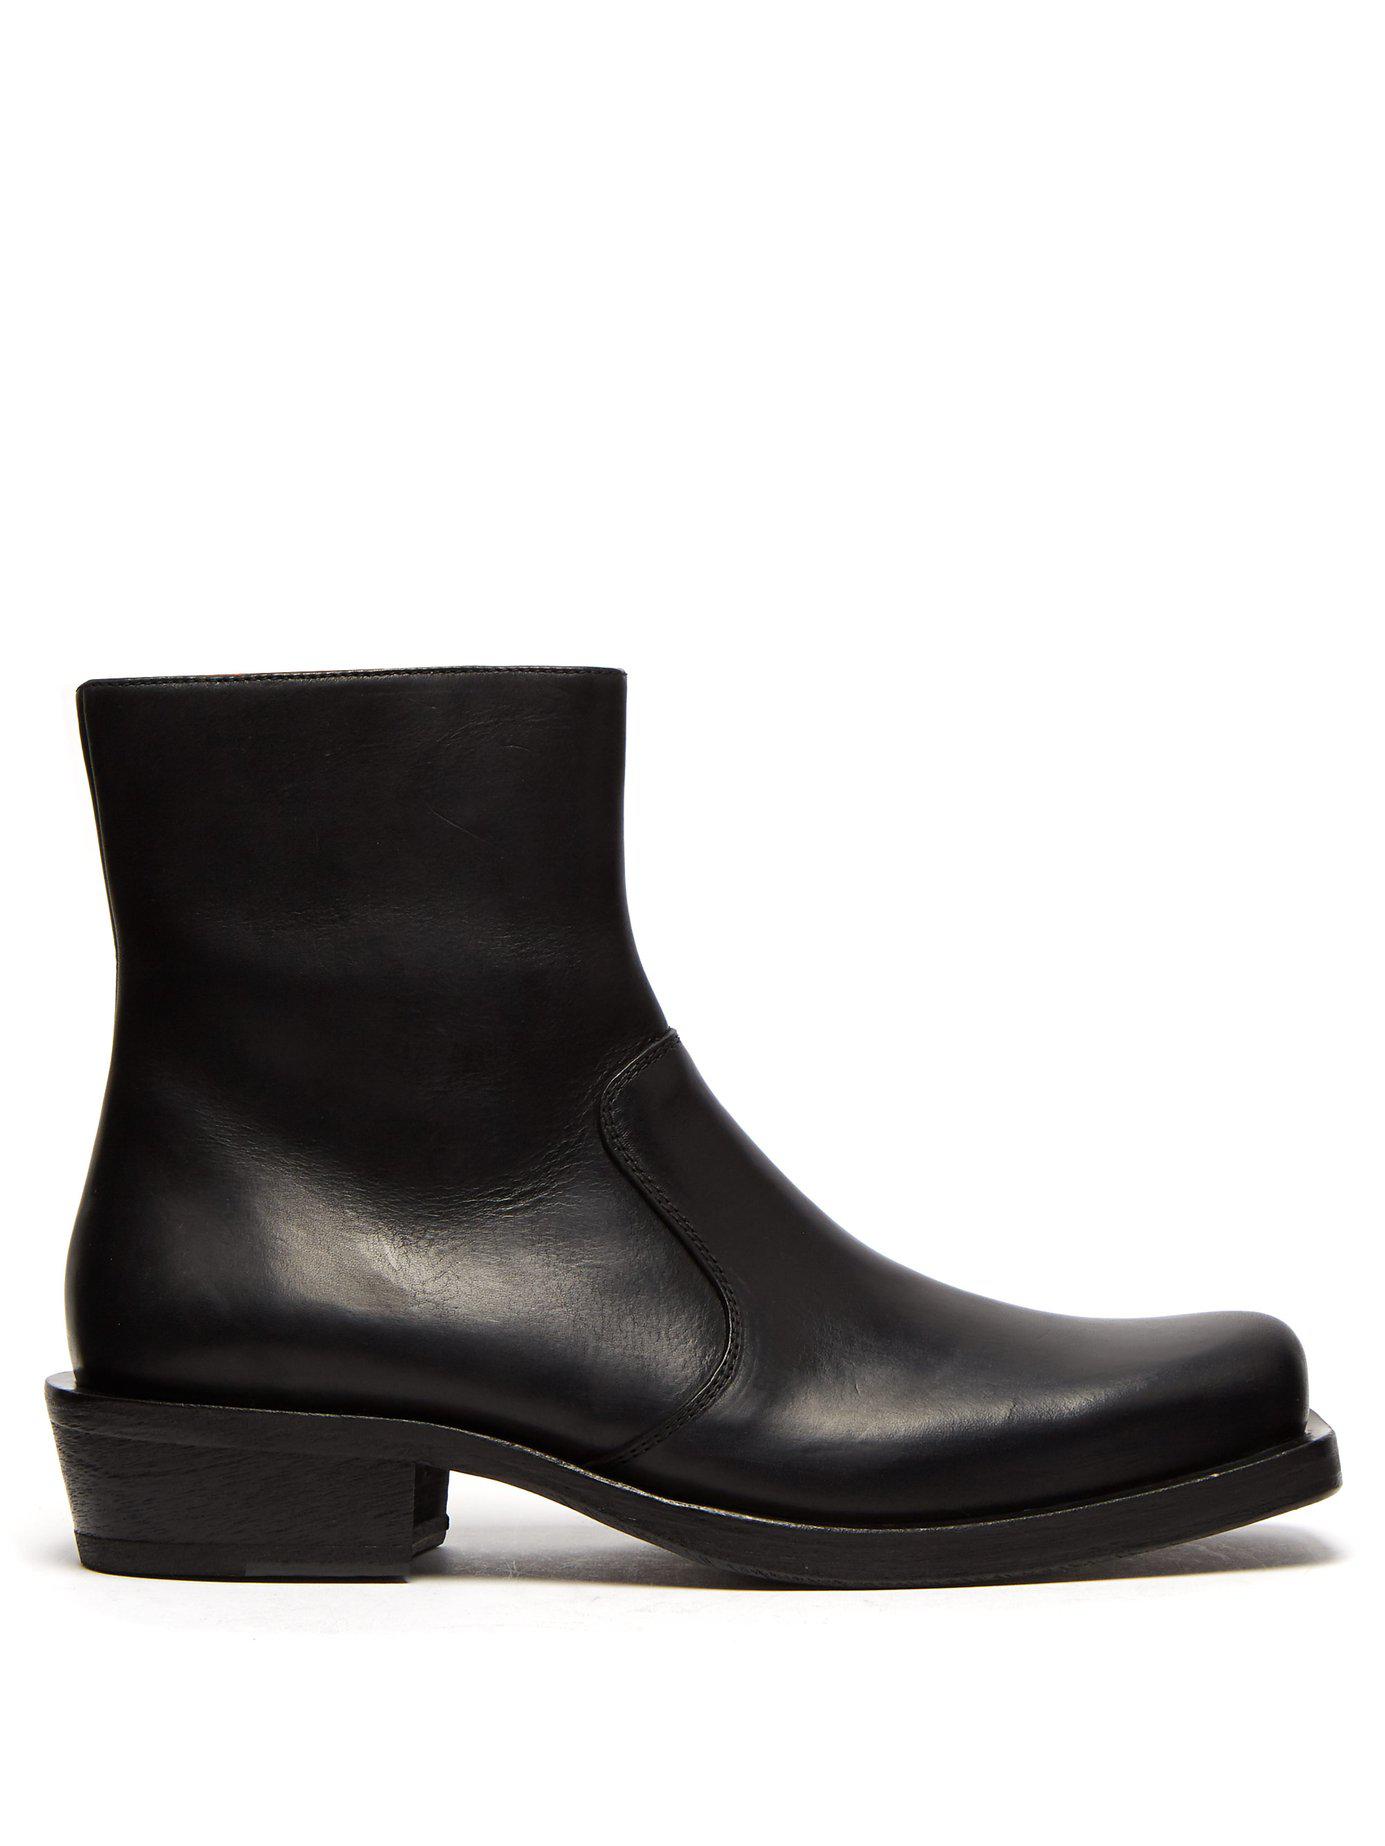 Acne Studios Square-toe Leather Ankle Boots in Black for Men | Lyst